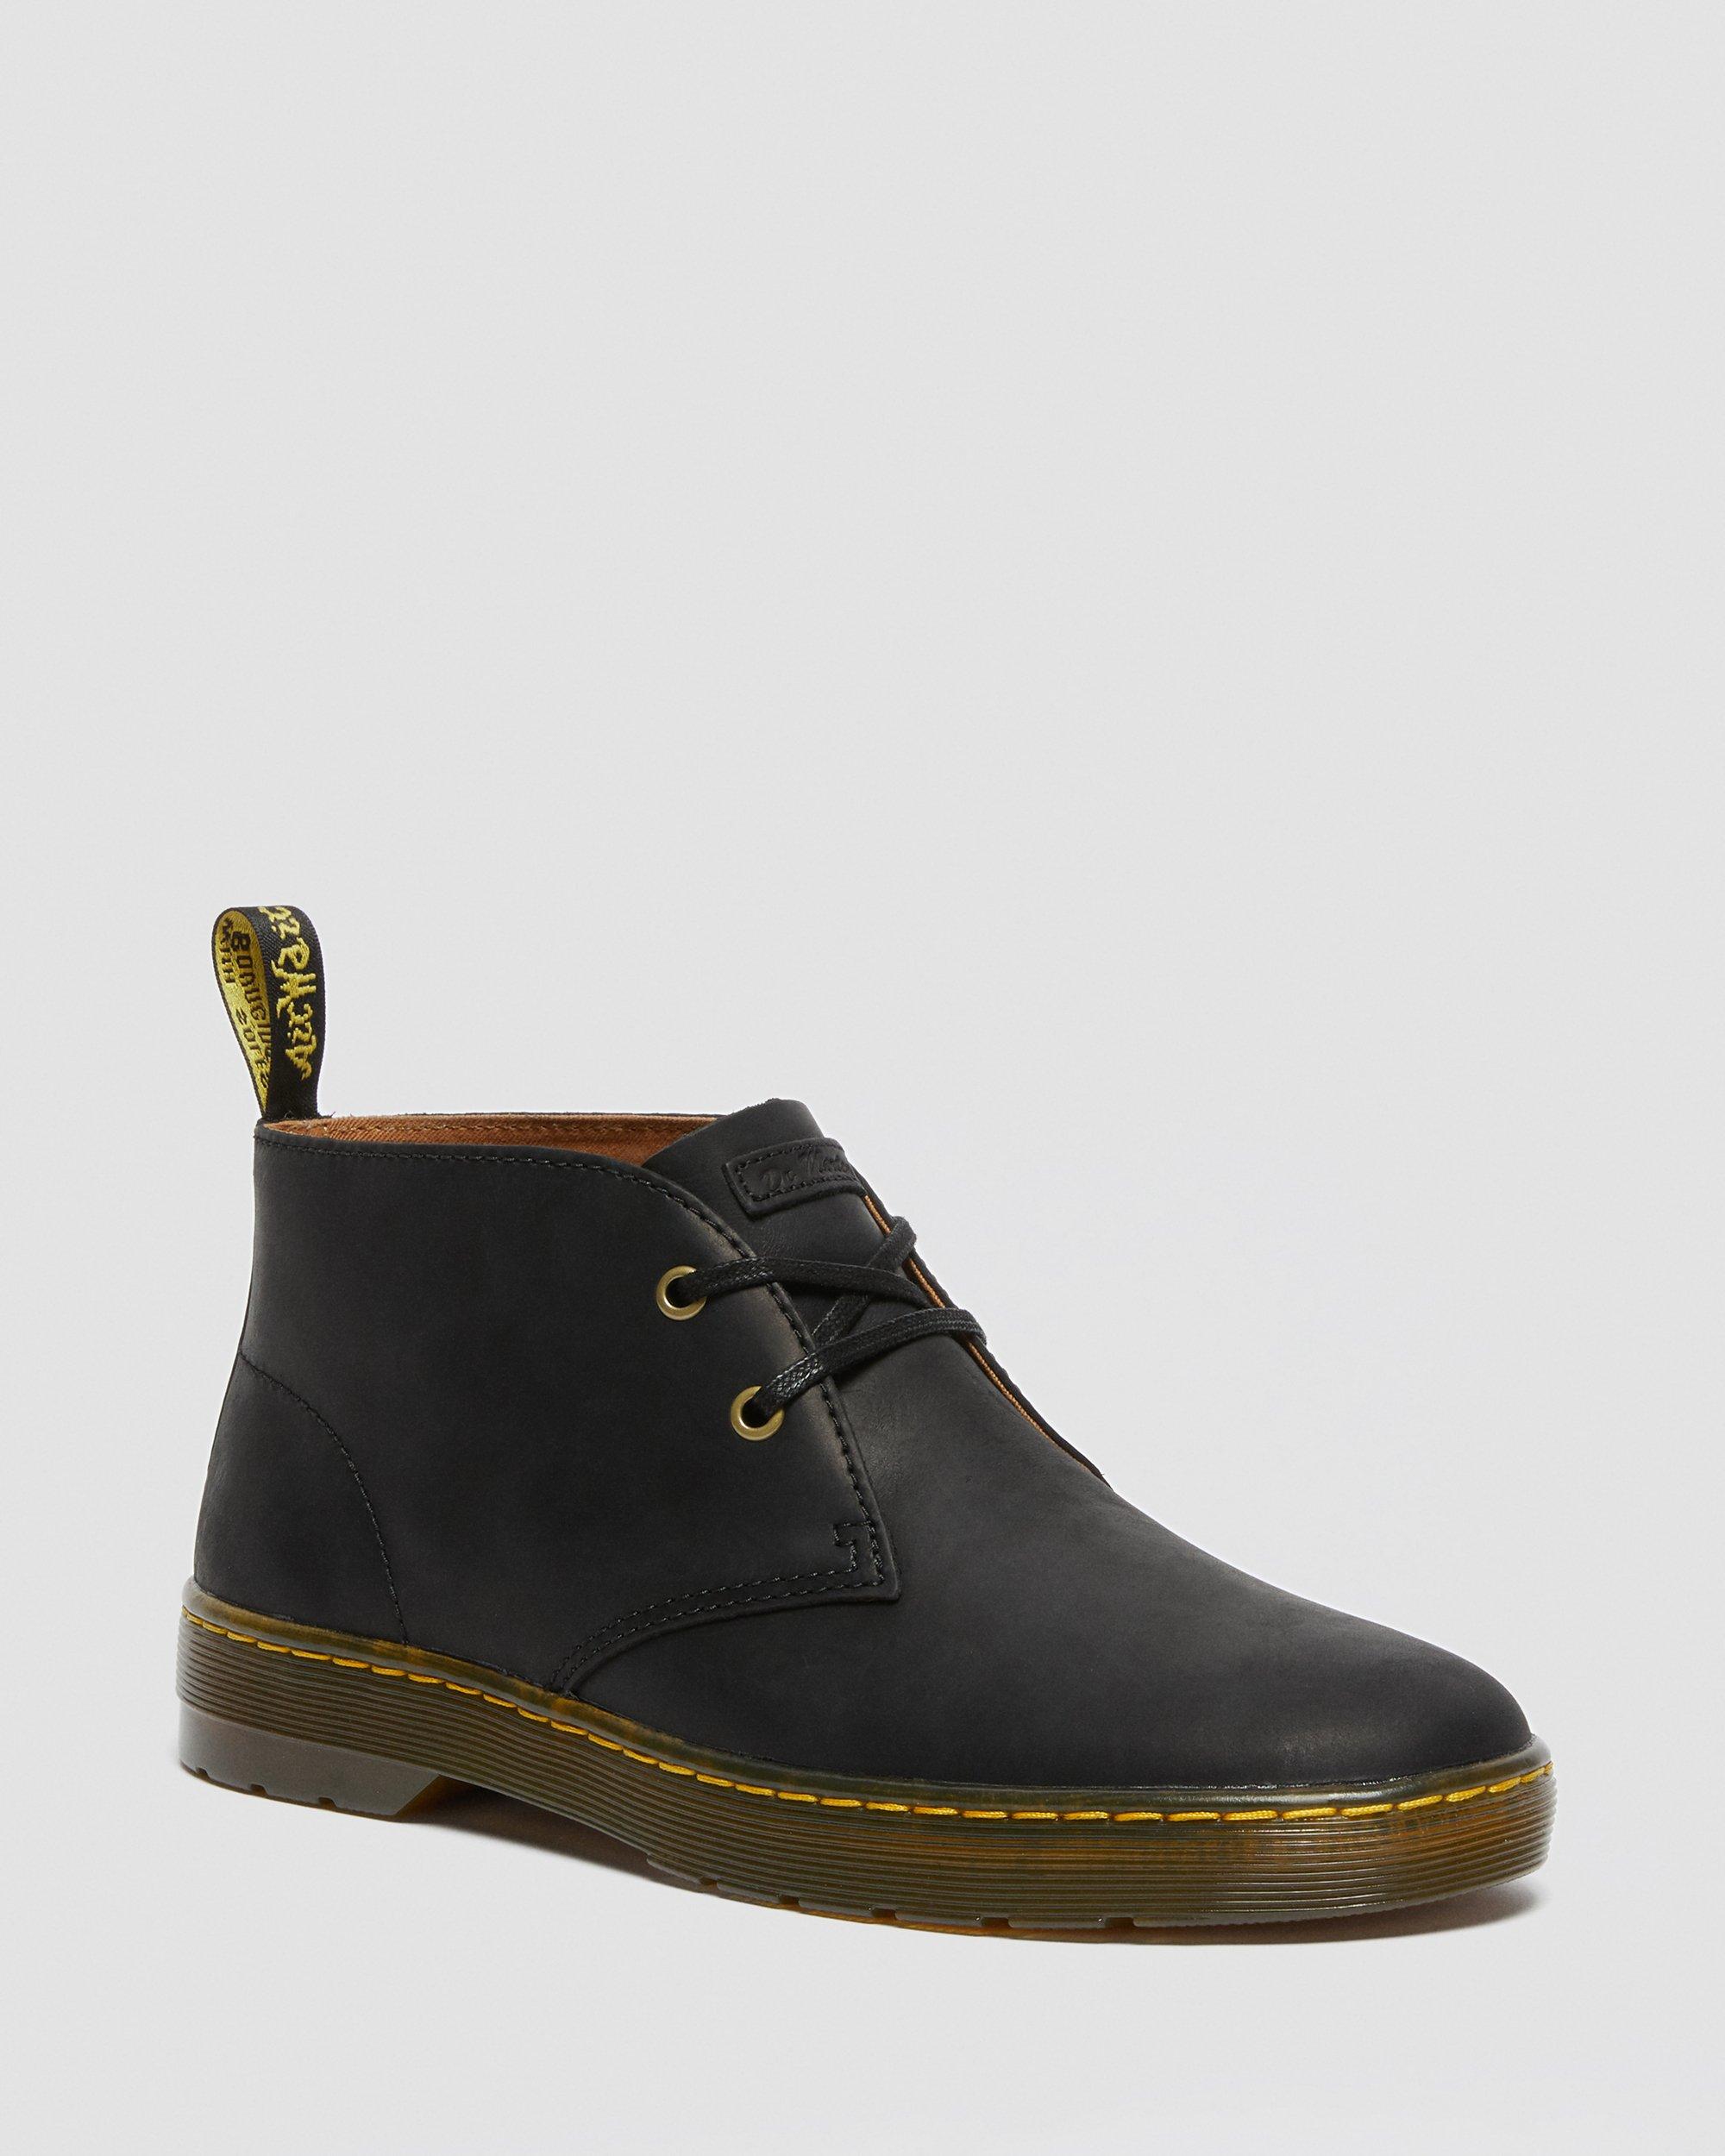 WYOMING LEATHER DESERT BOOTS 